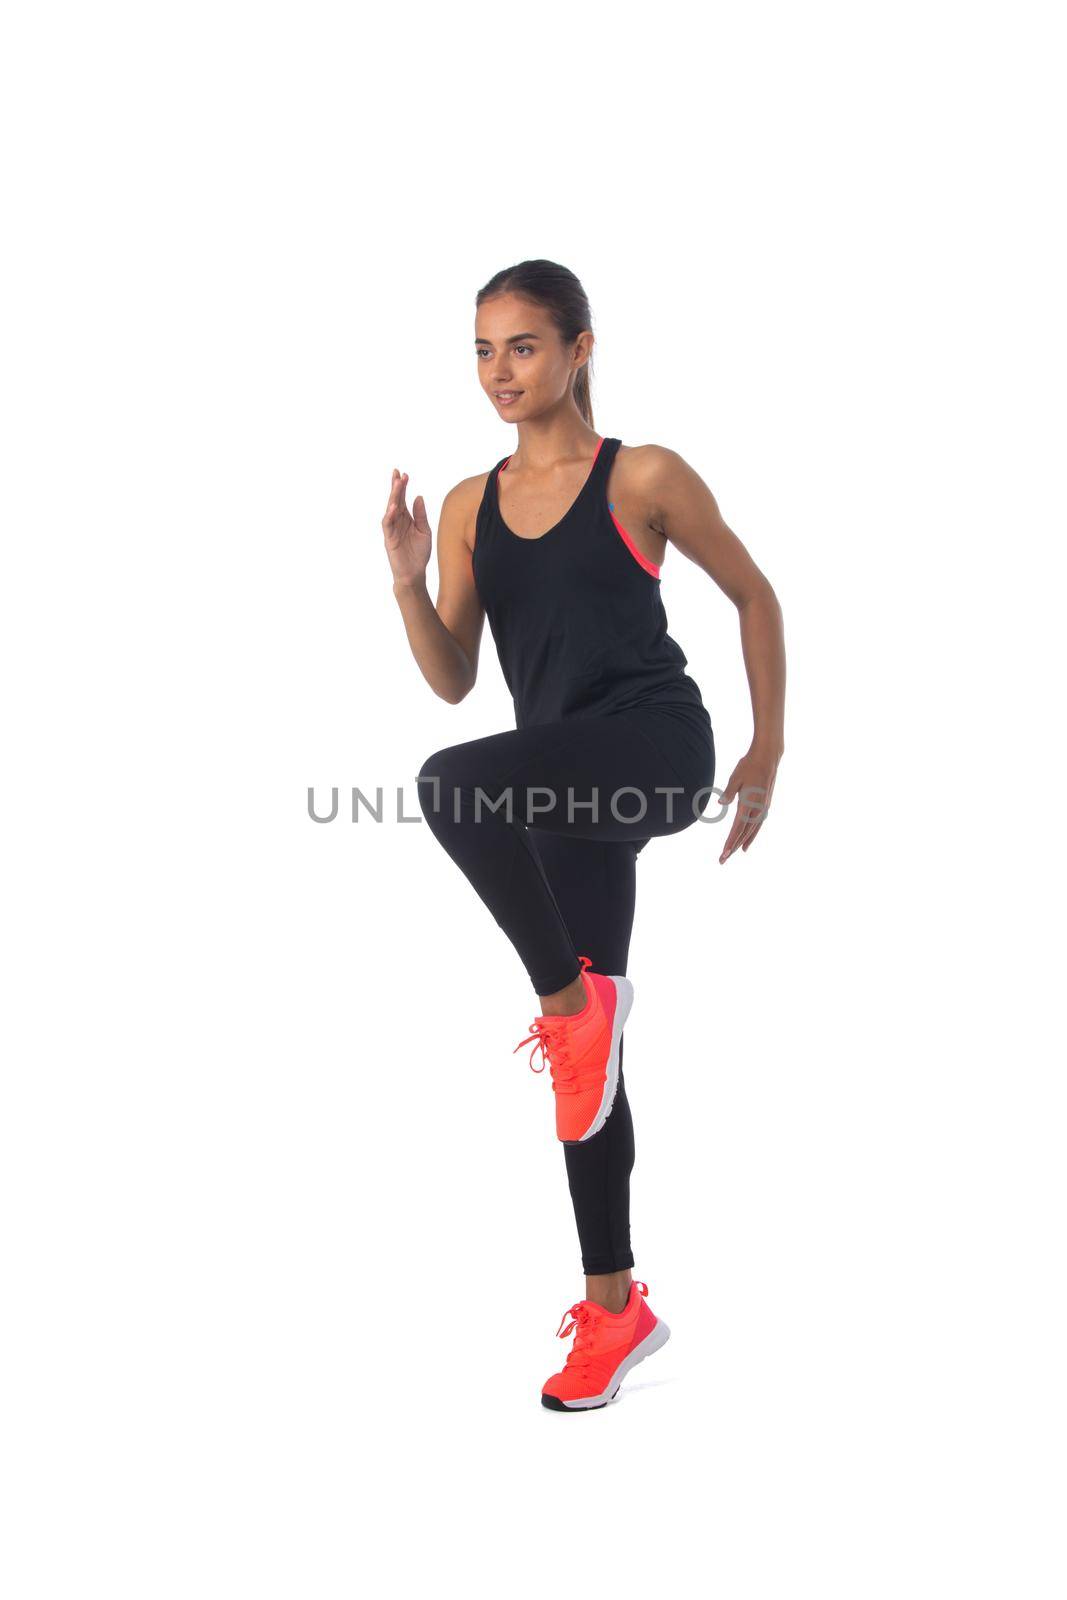 Healthy hispanic fitness girl with doing workout squat exercise isolated on white background